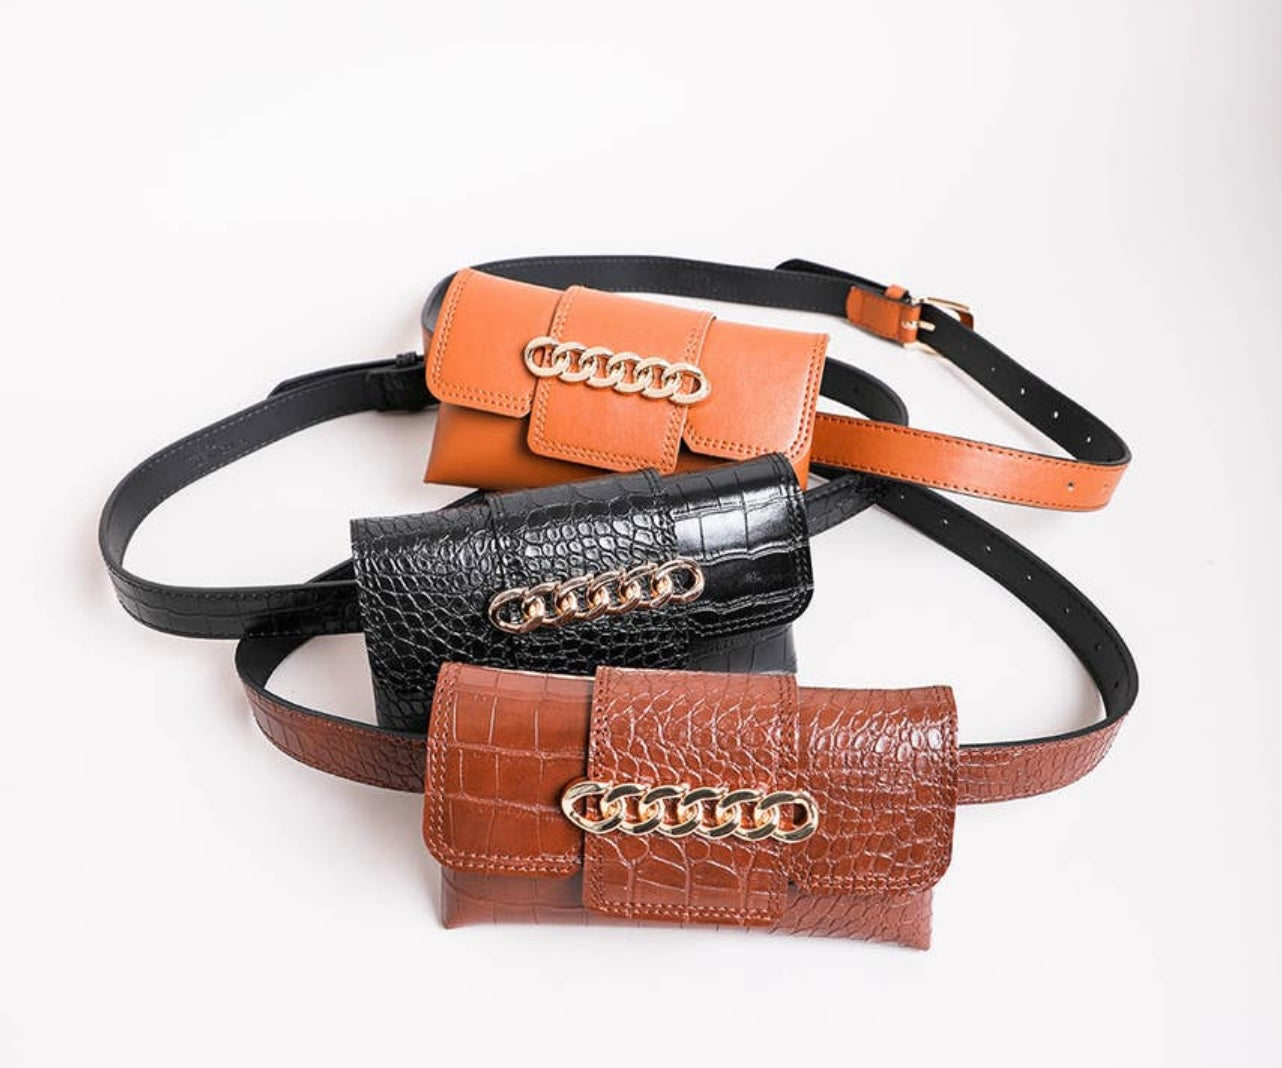 6 Ring Chain Belt (with removable clutch)